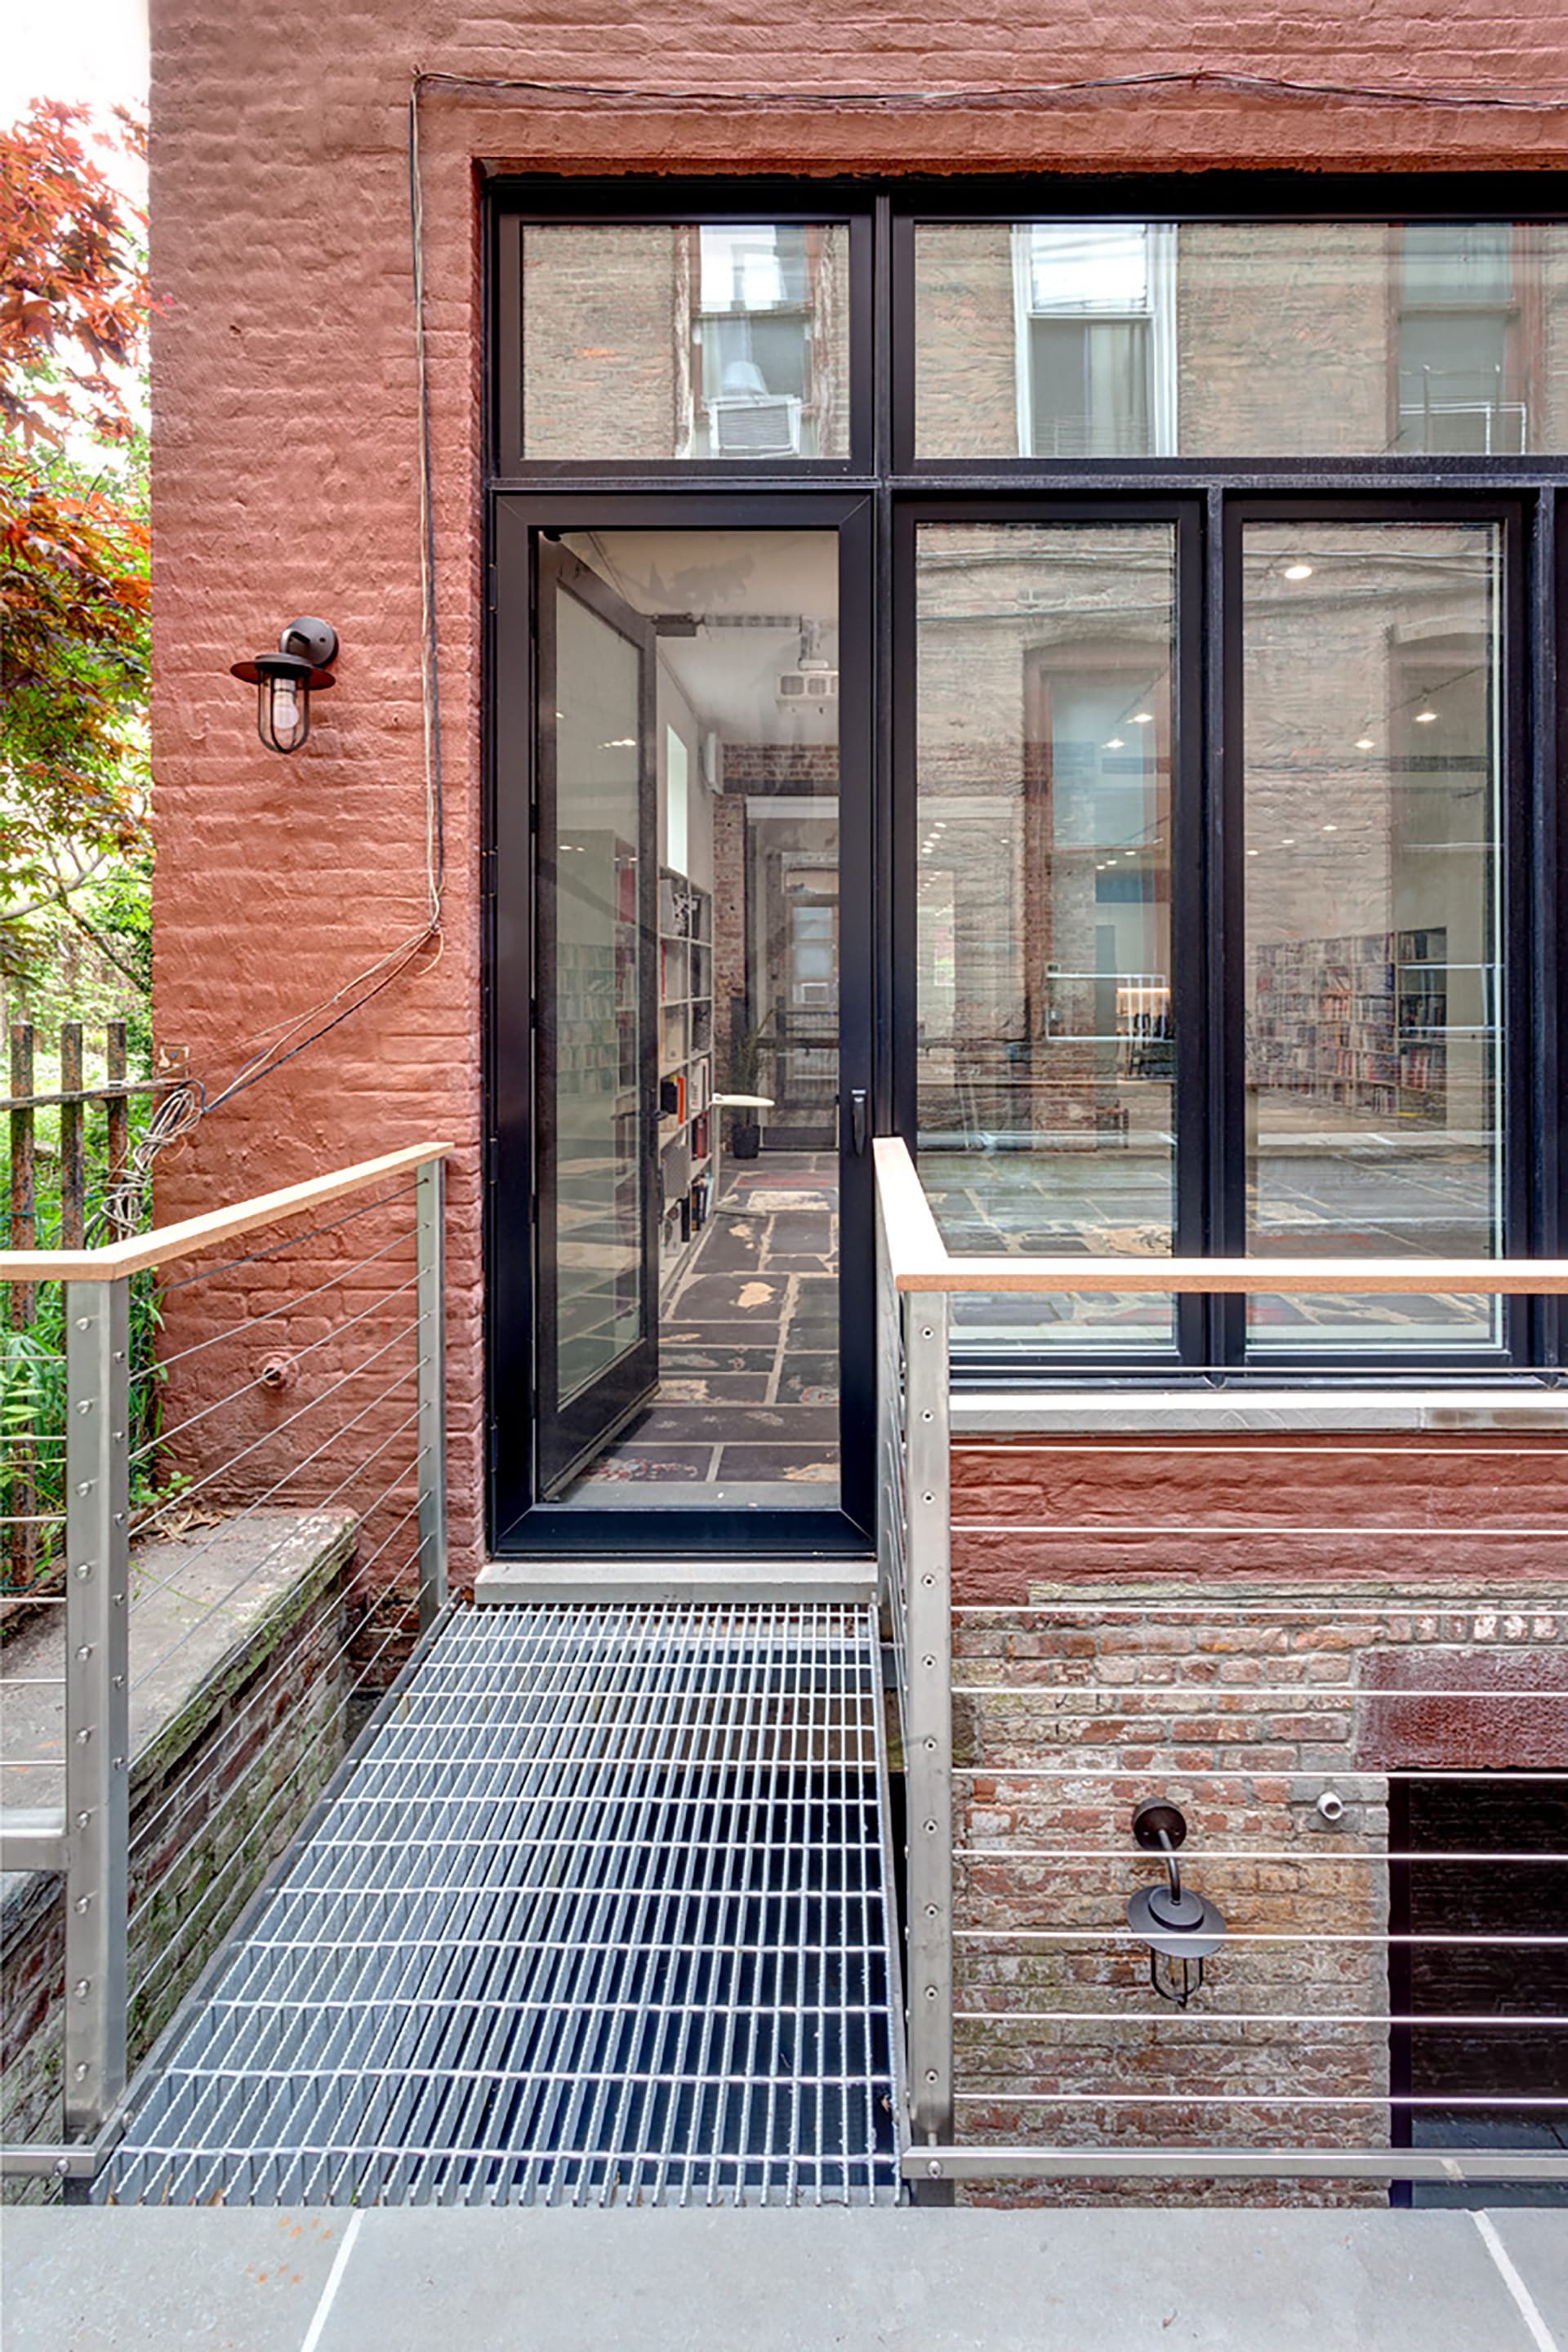 Metal bridge connecting a red brick building to a blue-stone paved rear yard over an areaway.